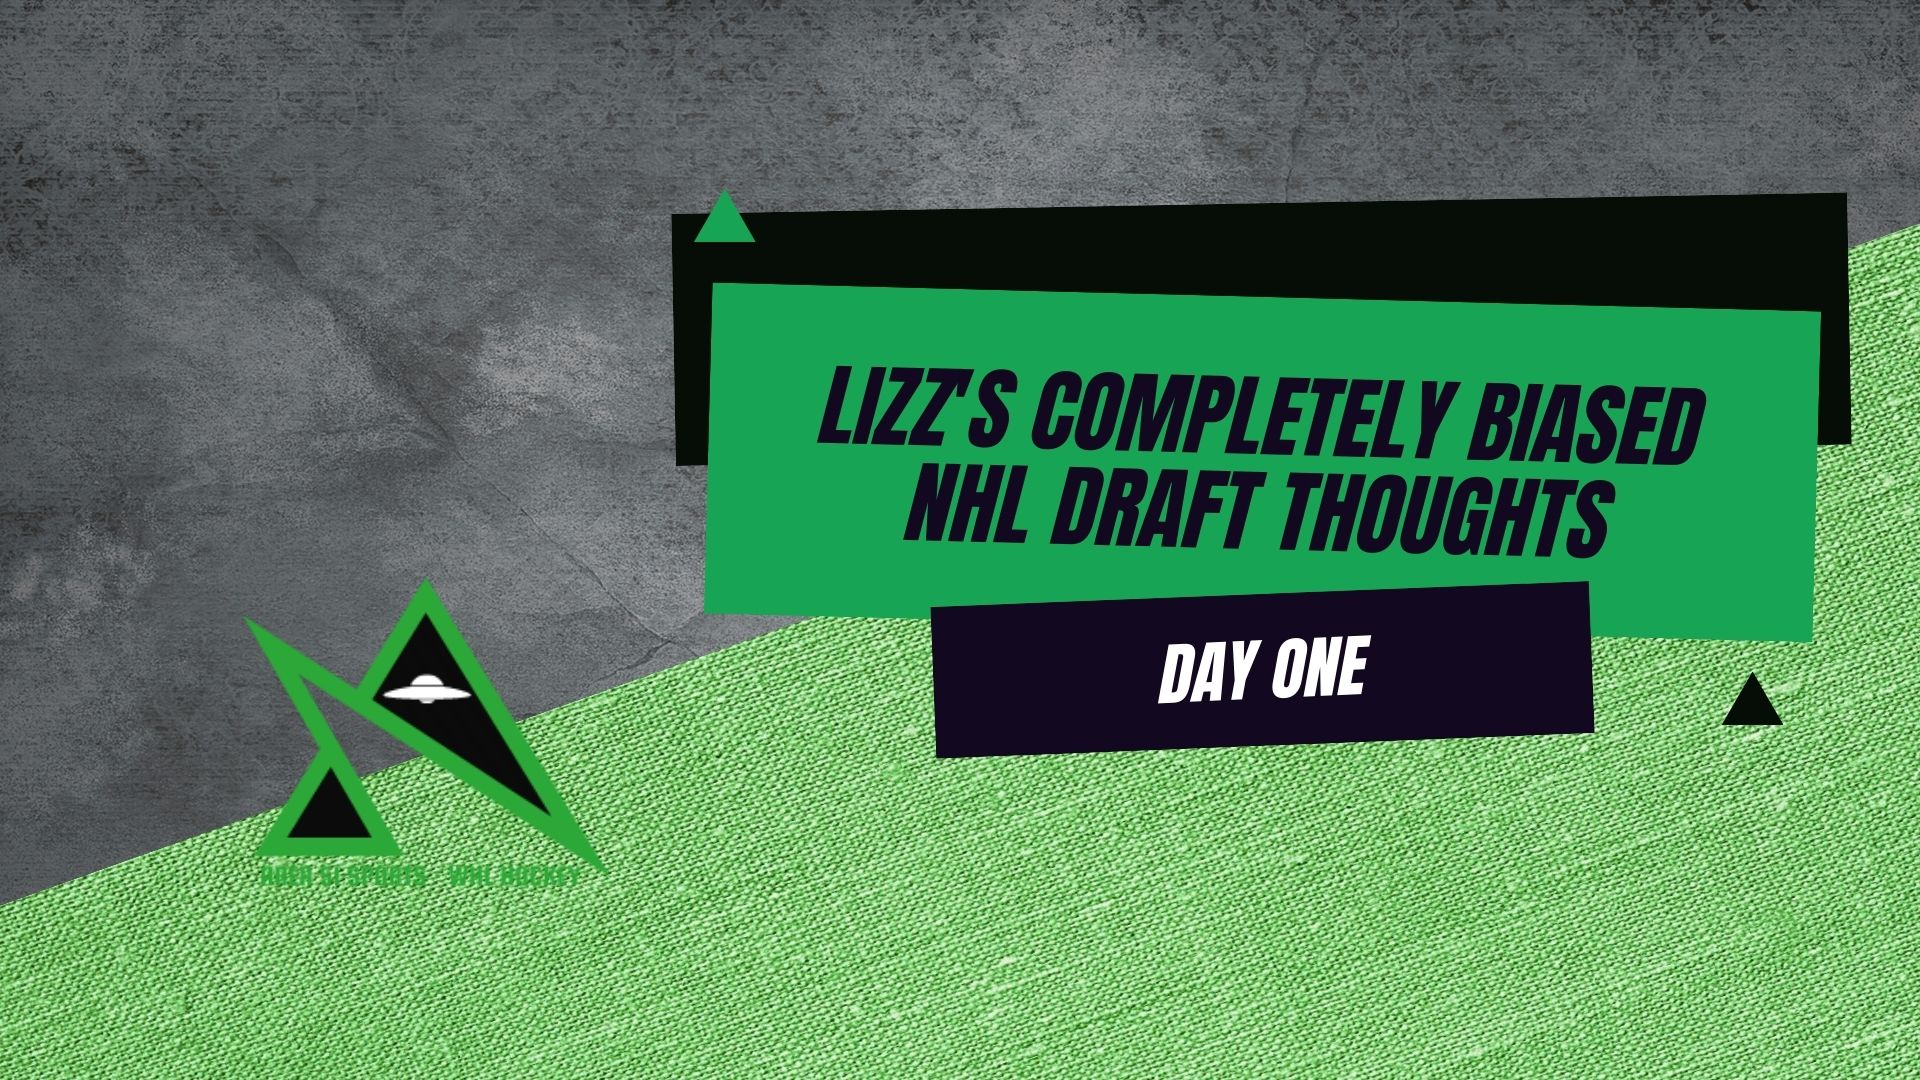 Lizz's Completely Biased NHL Draft Thoughts day one